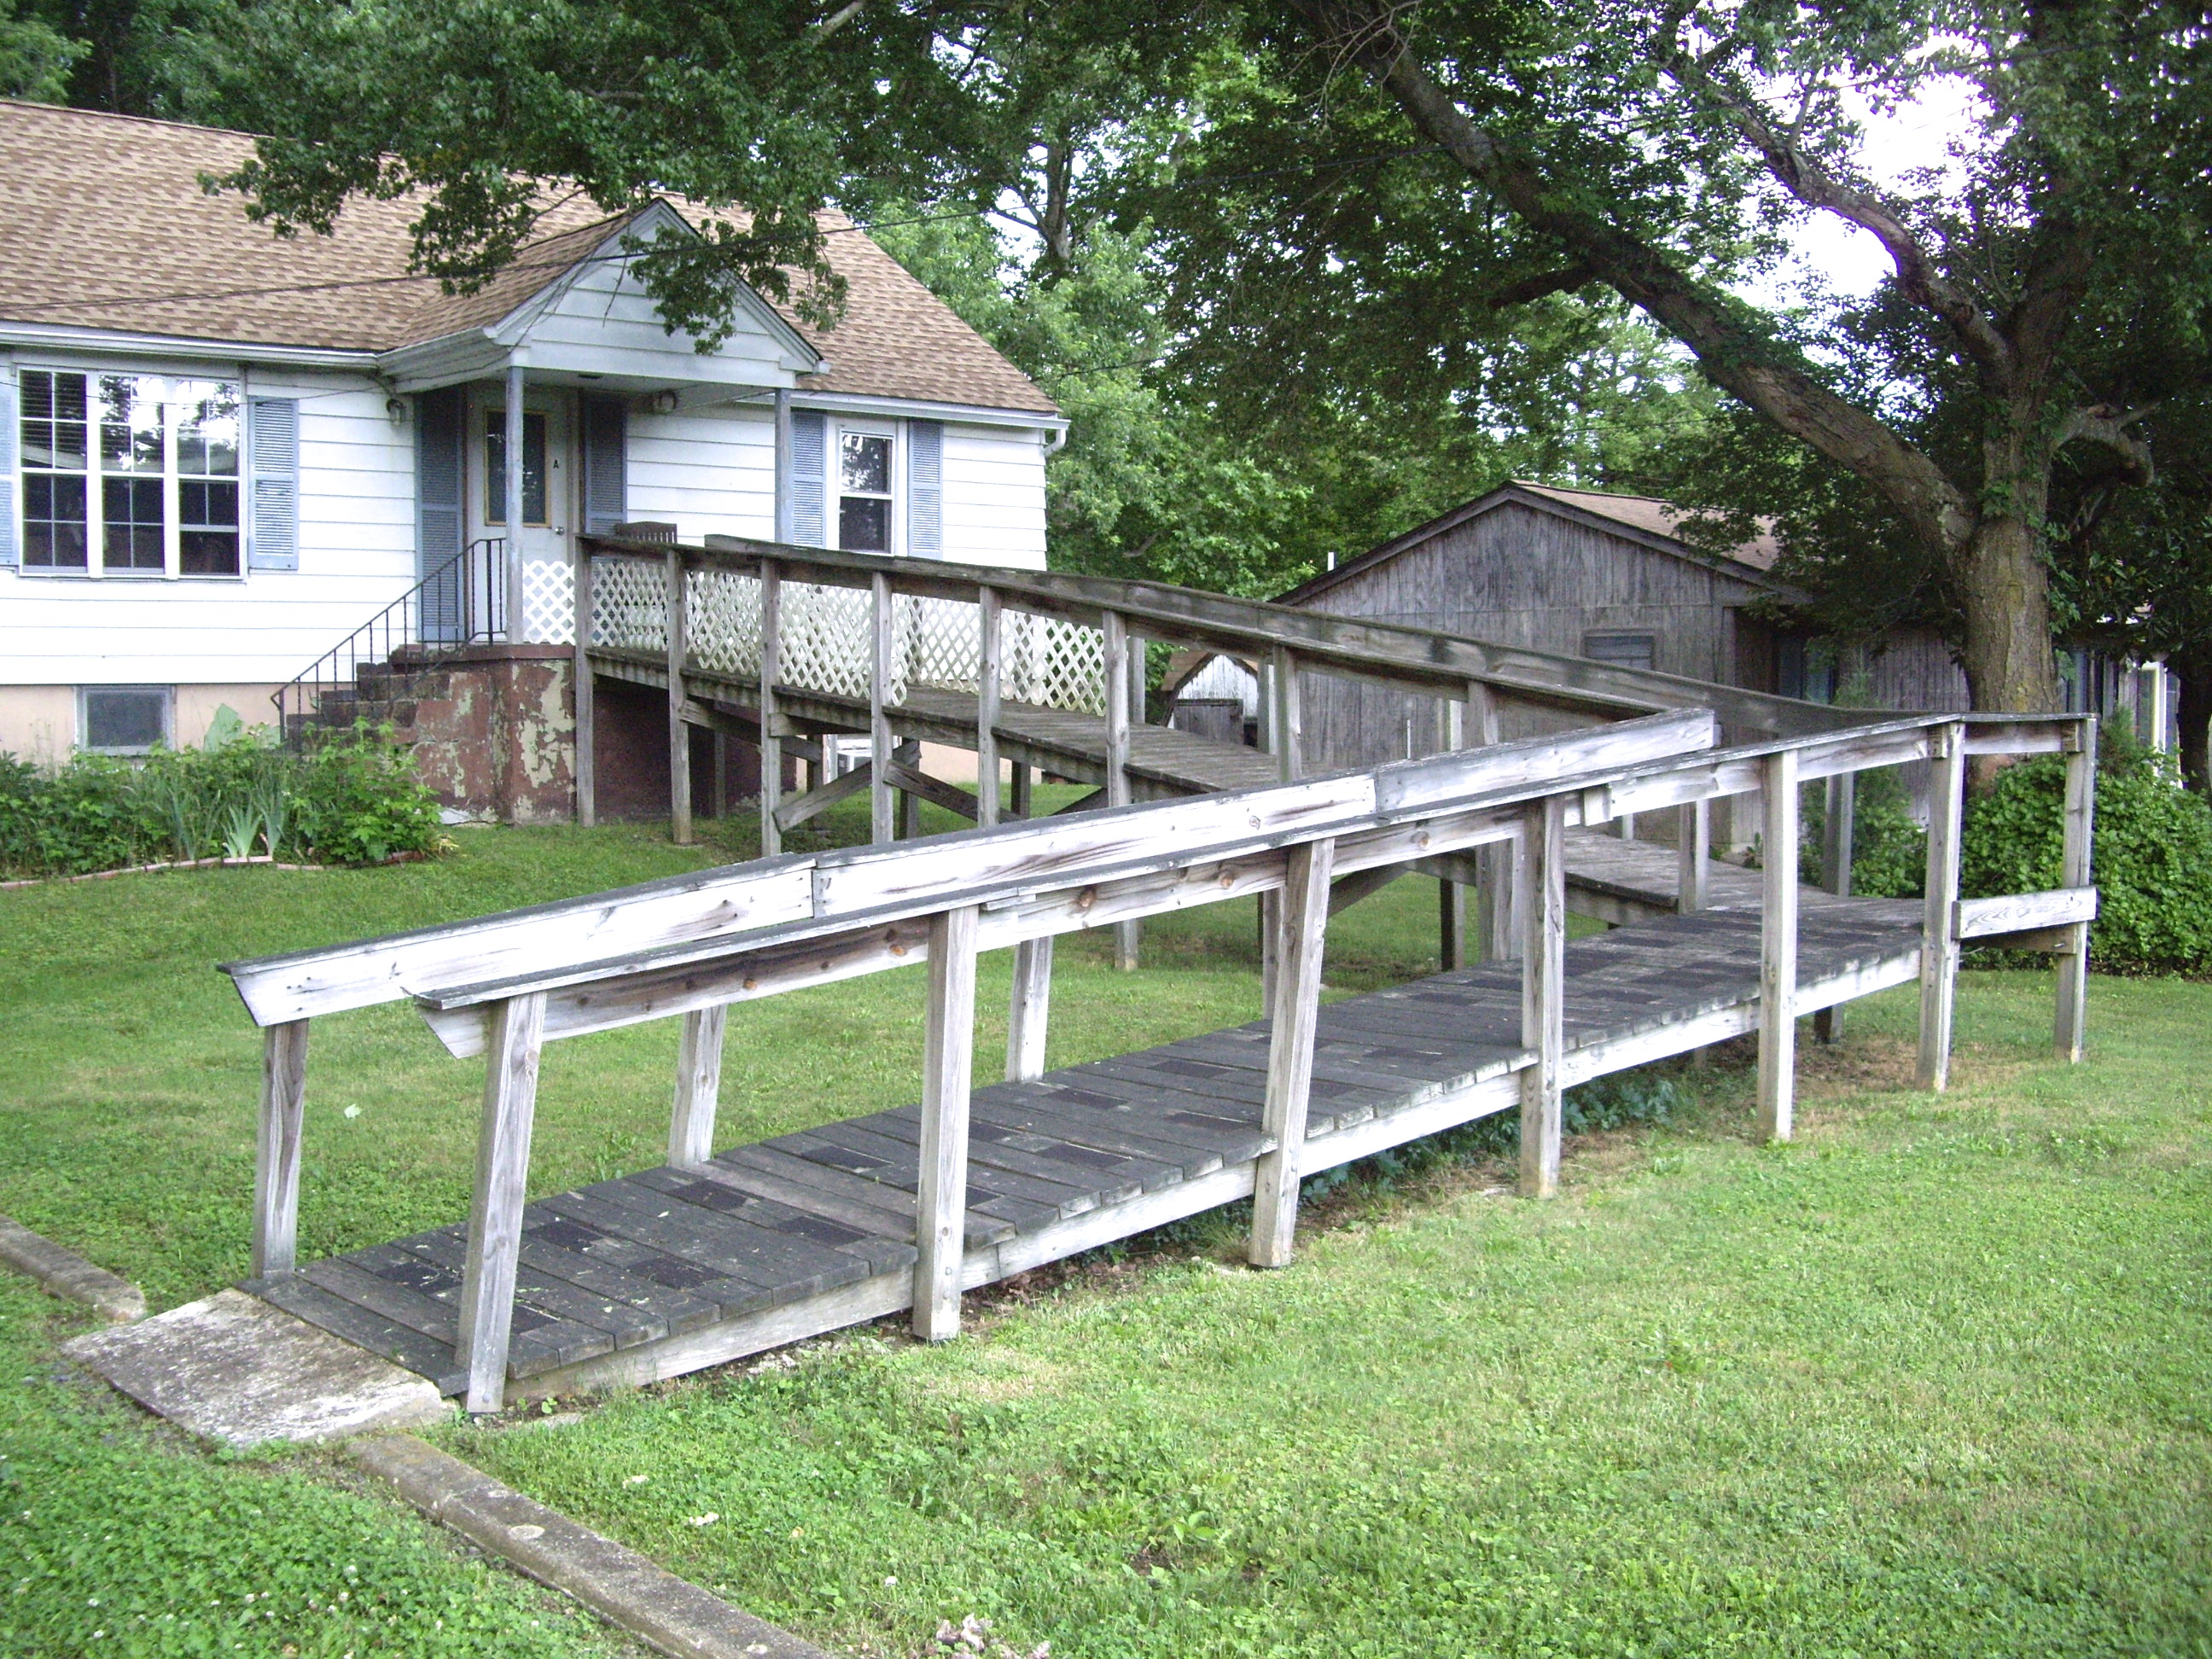 Does this wheelchair ramp add value to my home? (lawsuit, property To Build A Handicapped Access Ramp The Building